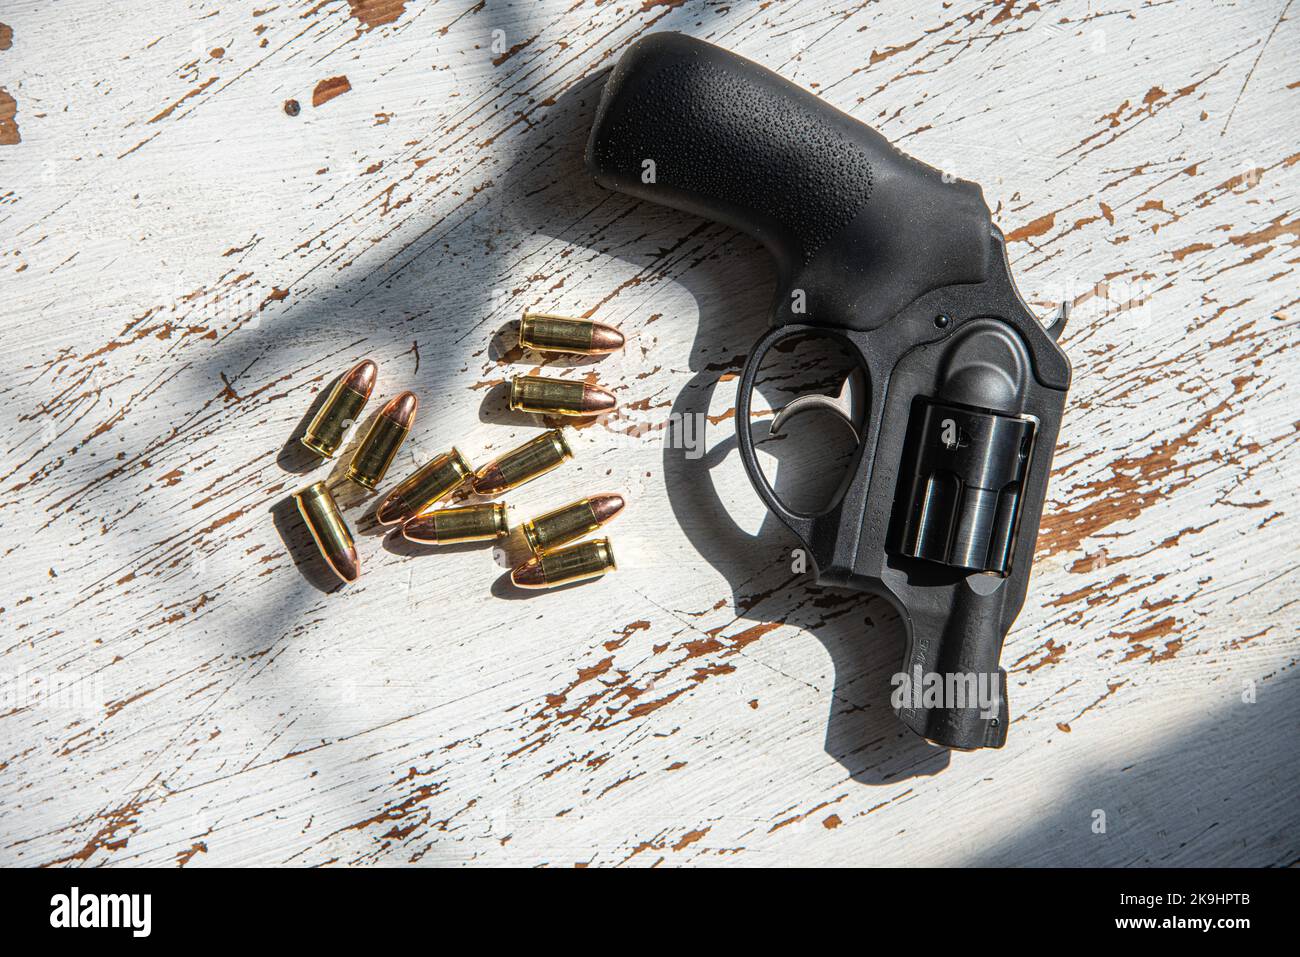 A black, Ruger, 9mm, snub-nosed revolver and a grouping of 9mm bullets. Stock Photo